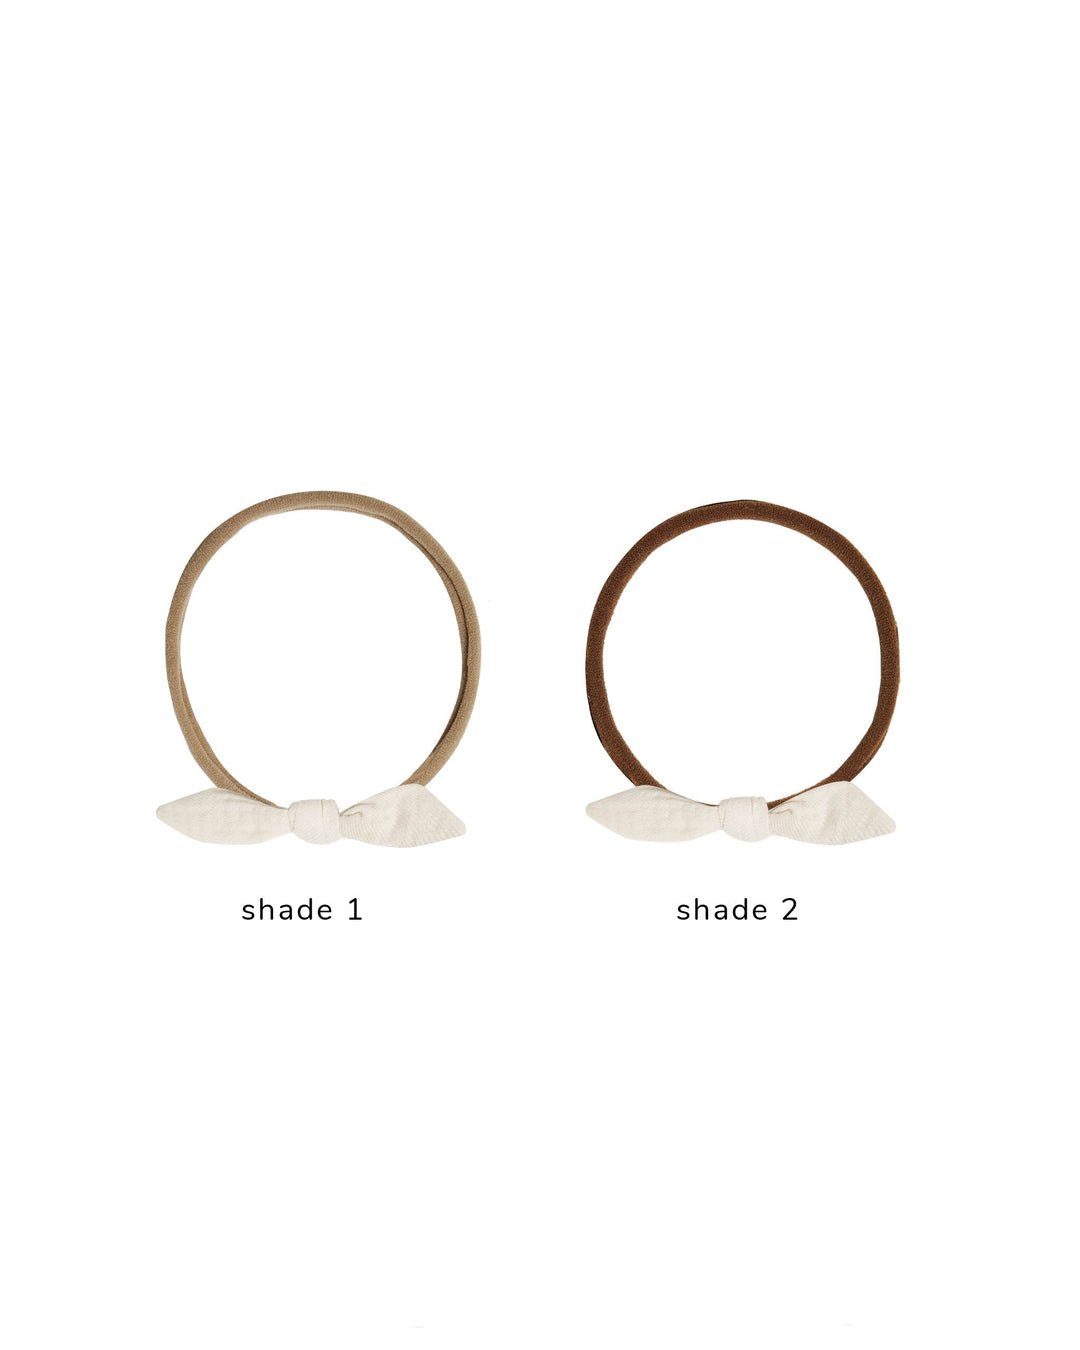 Quincy Mae – Little Knot Headband in Natural